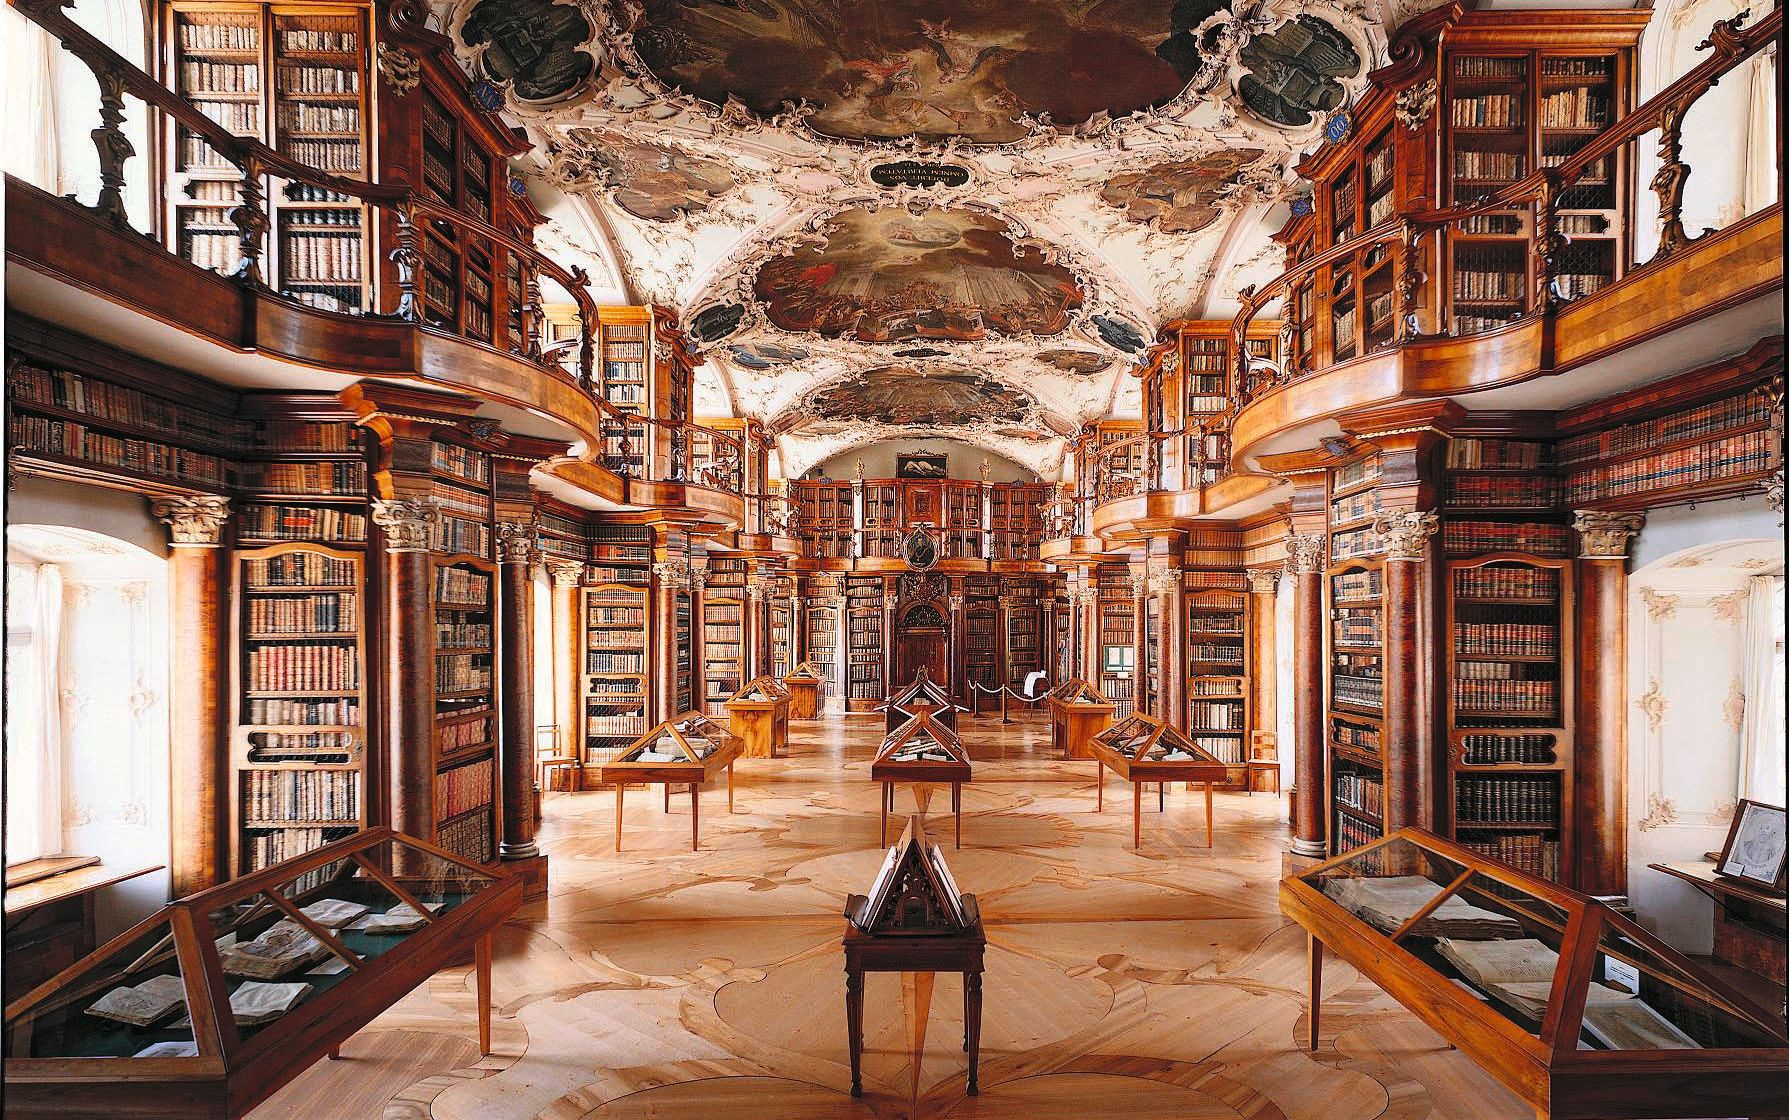 Abbey Library of Saint Gall, A-listed object in the Inventory of Cultural Property, UNESCO World Heritage Site, and nominated for enhanced protection.